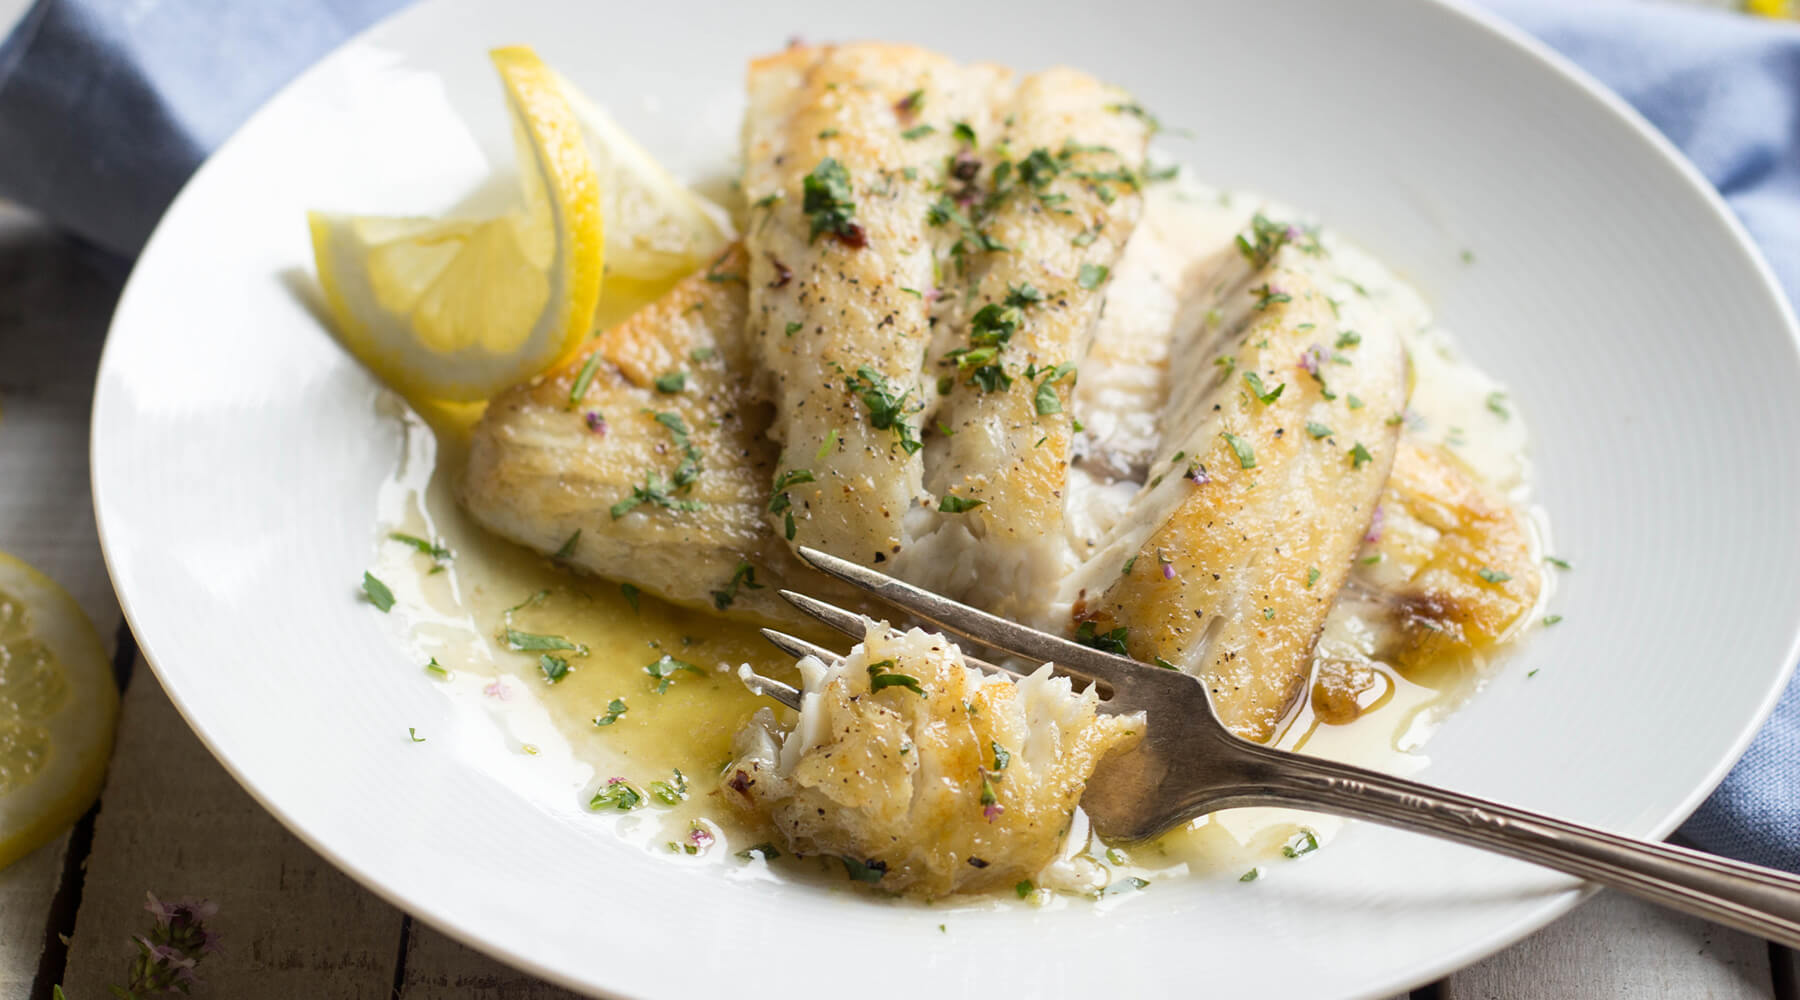 Fish with Coconut-Shallot Sauce